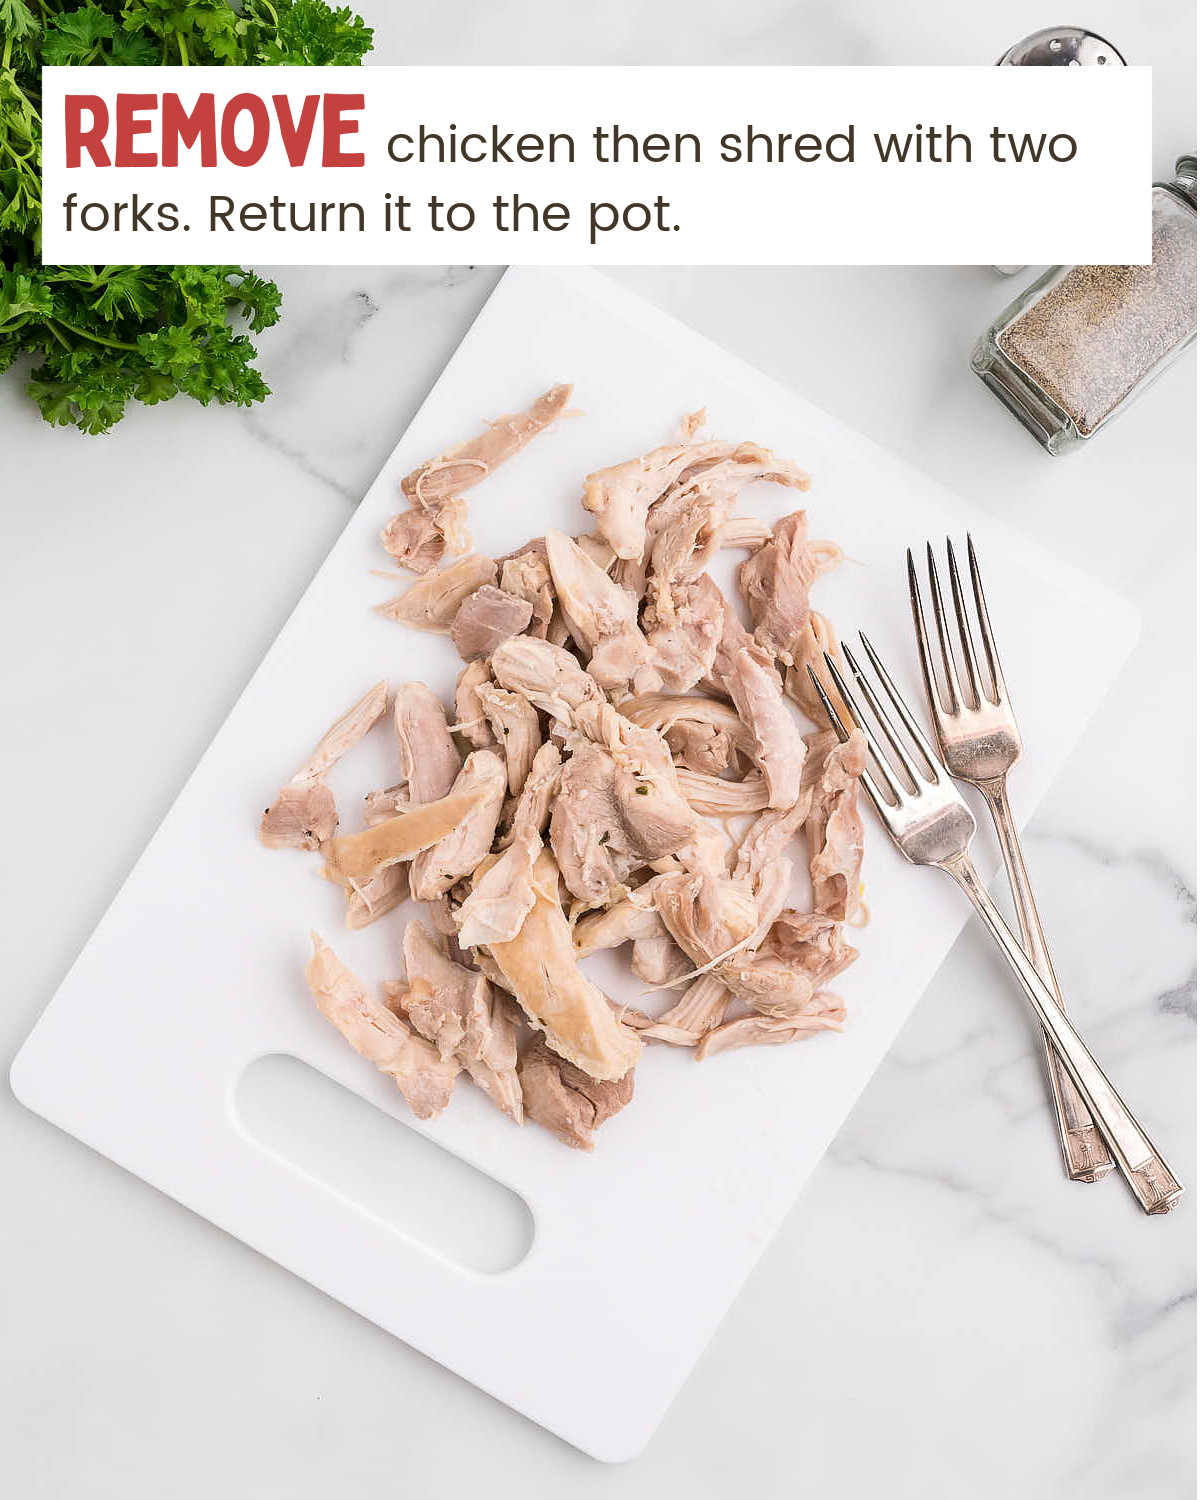 Shredded chicken with two forks on a white cutting board.